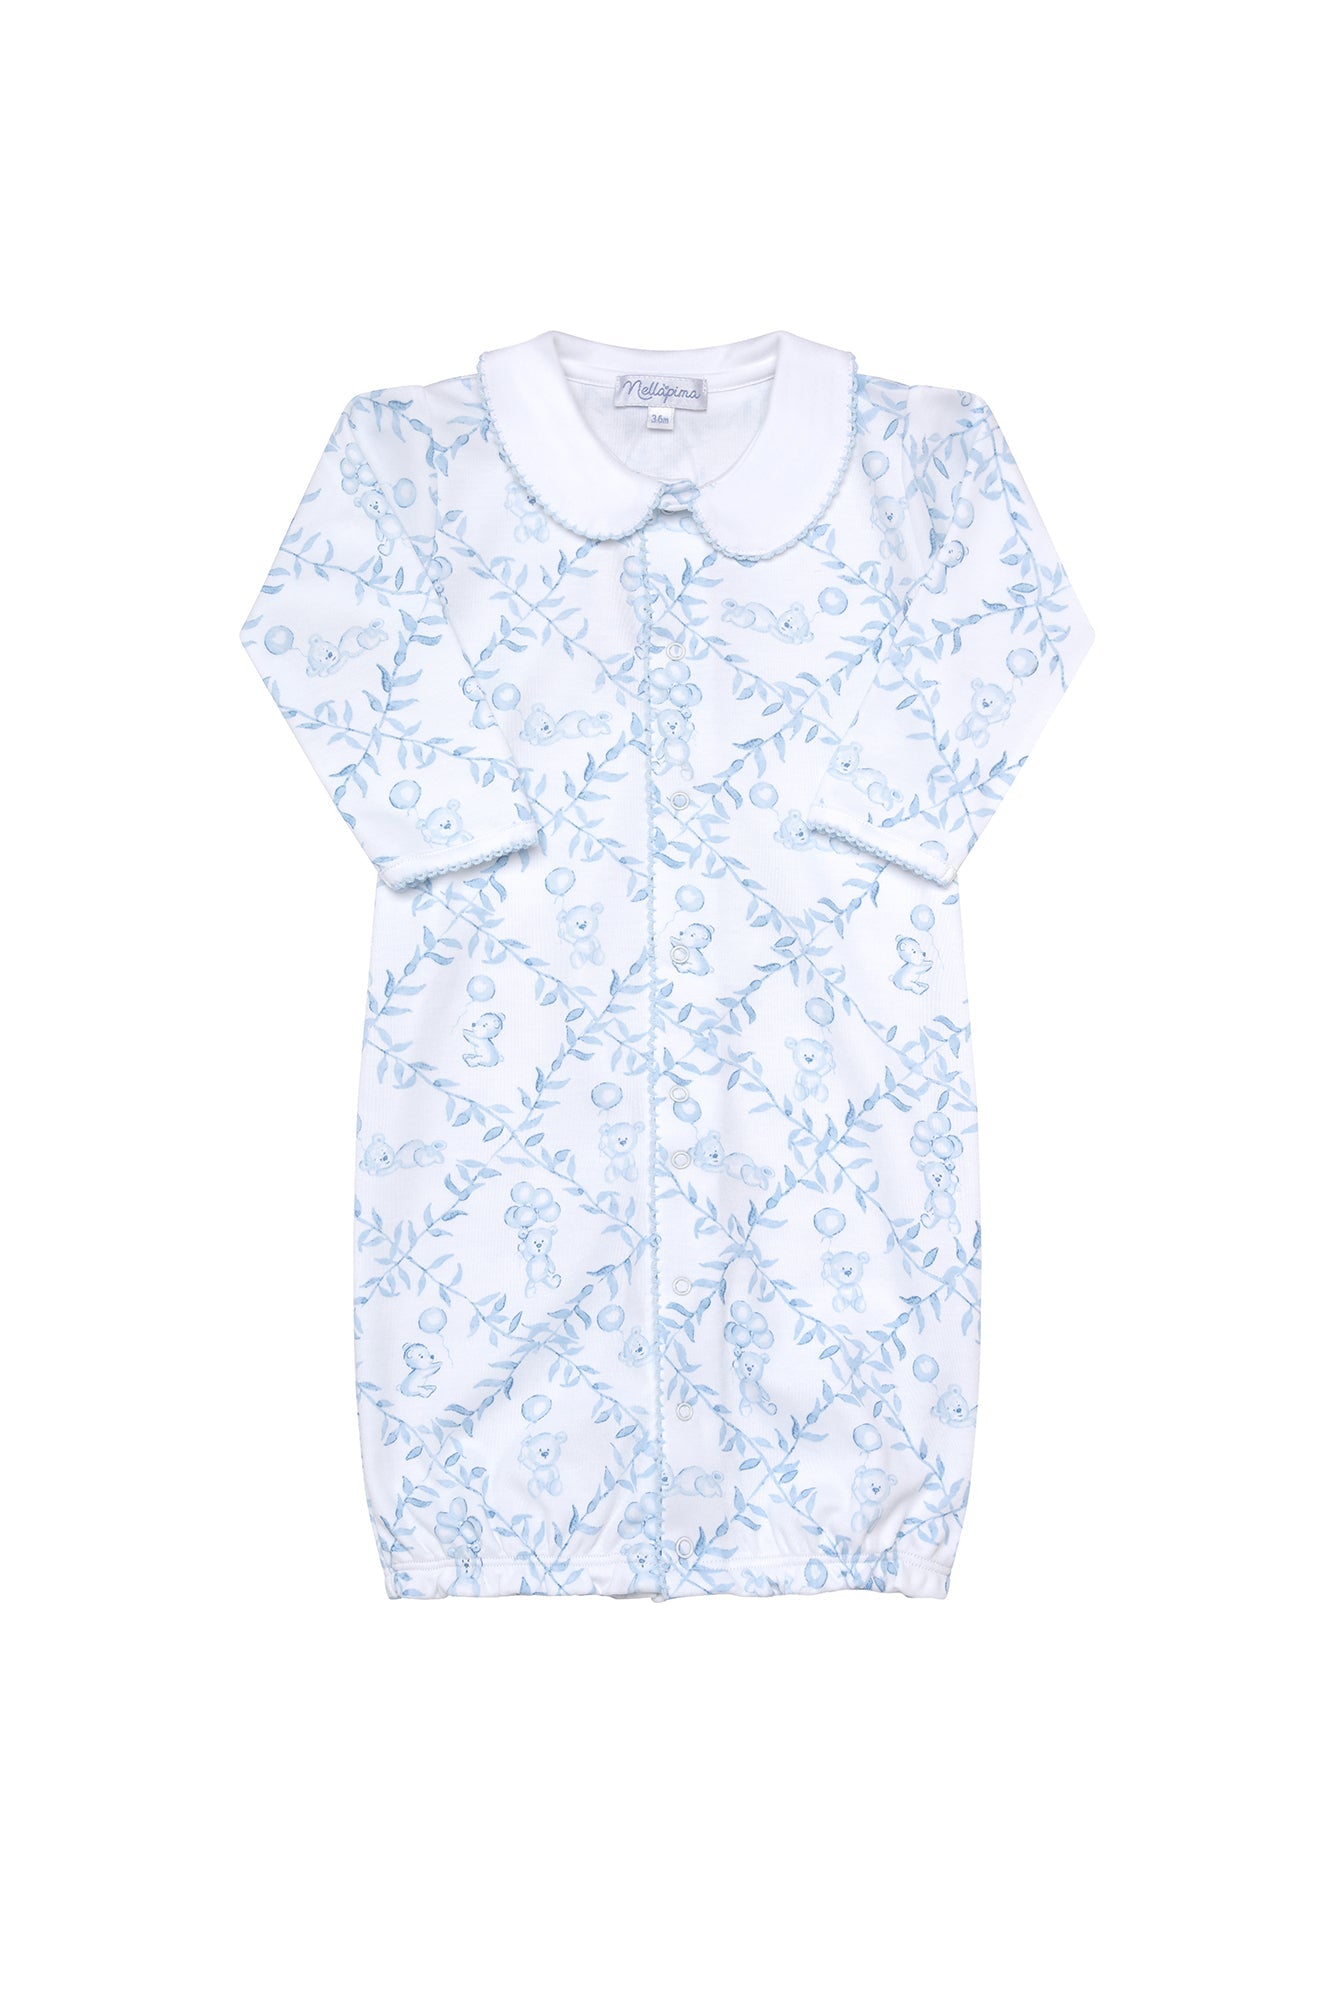 Baby Boy Blue Bears Trellace Baby Converter Gown